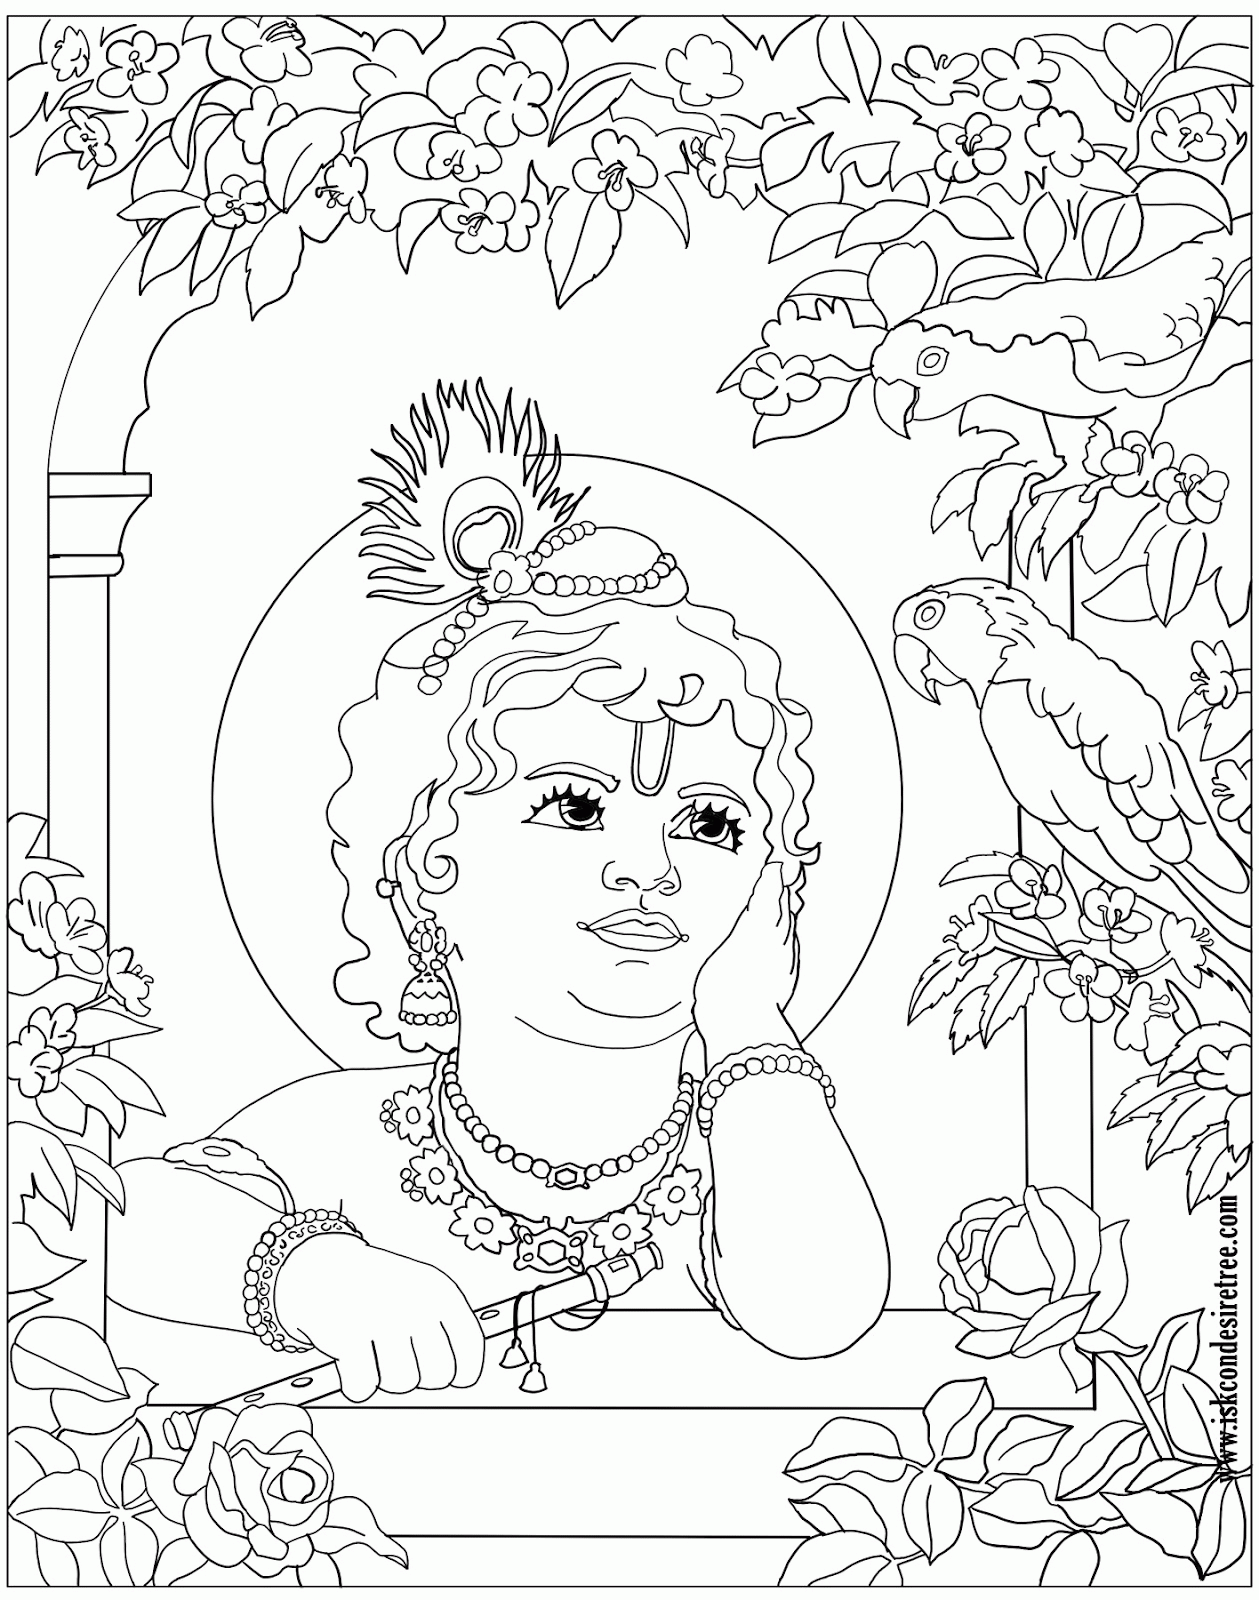 Free Krishna Coloring Page, Download Free Clip Art, Free Clip Art on Clipart Library